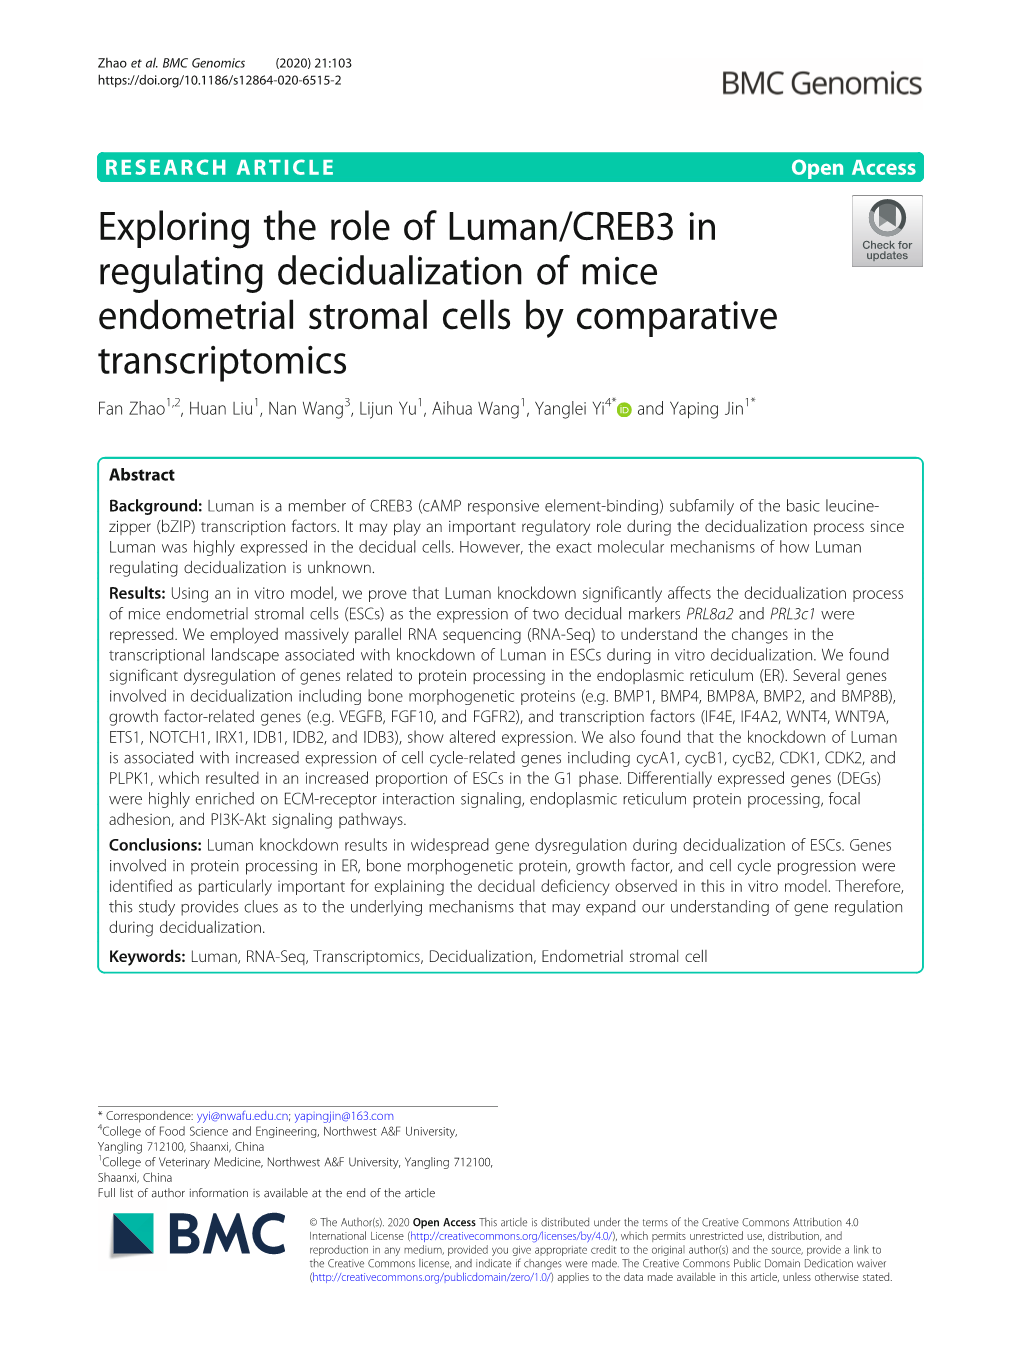 Exploring the Role of Luman/CREB3 in Regulating Decidualization of Mice